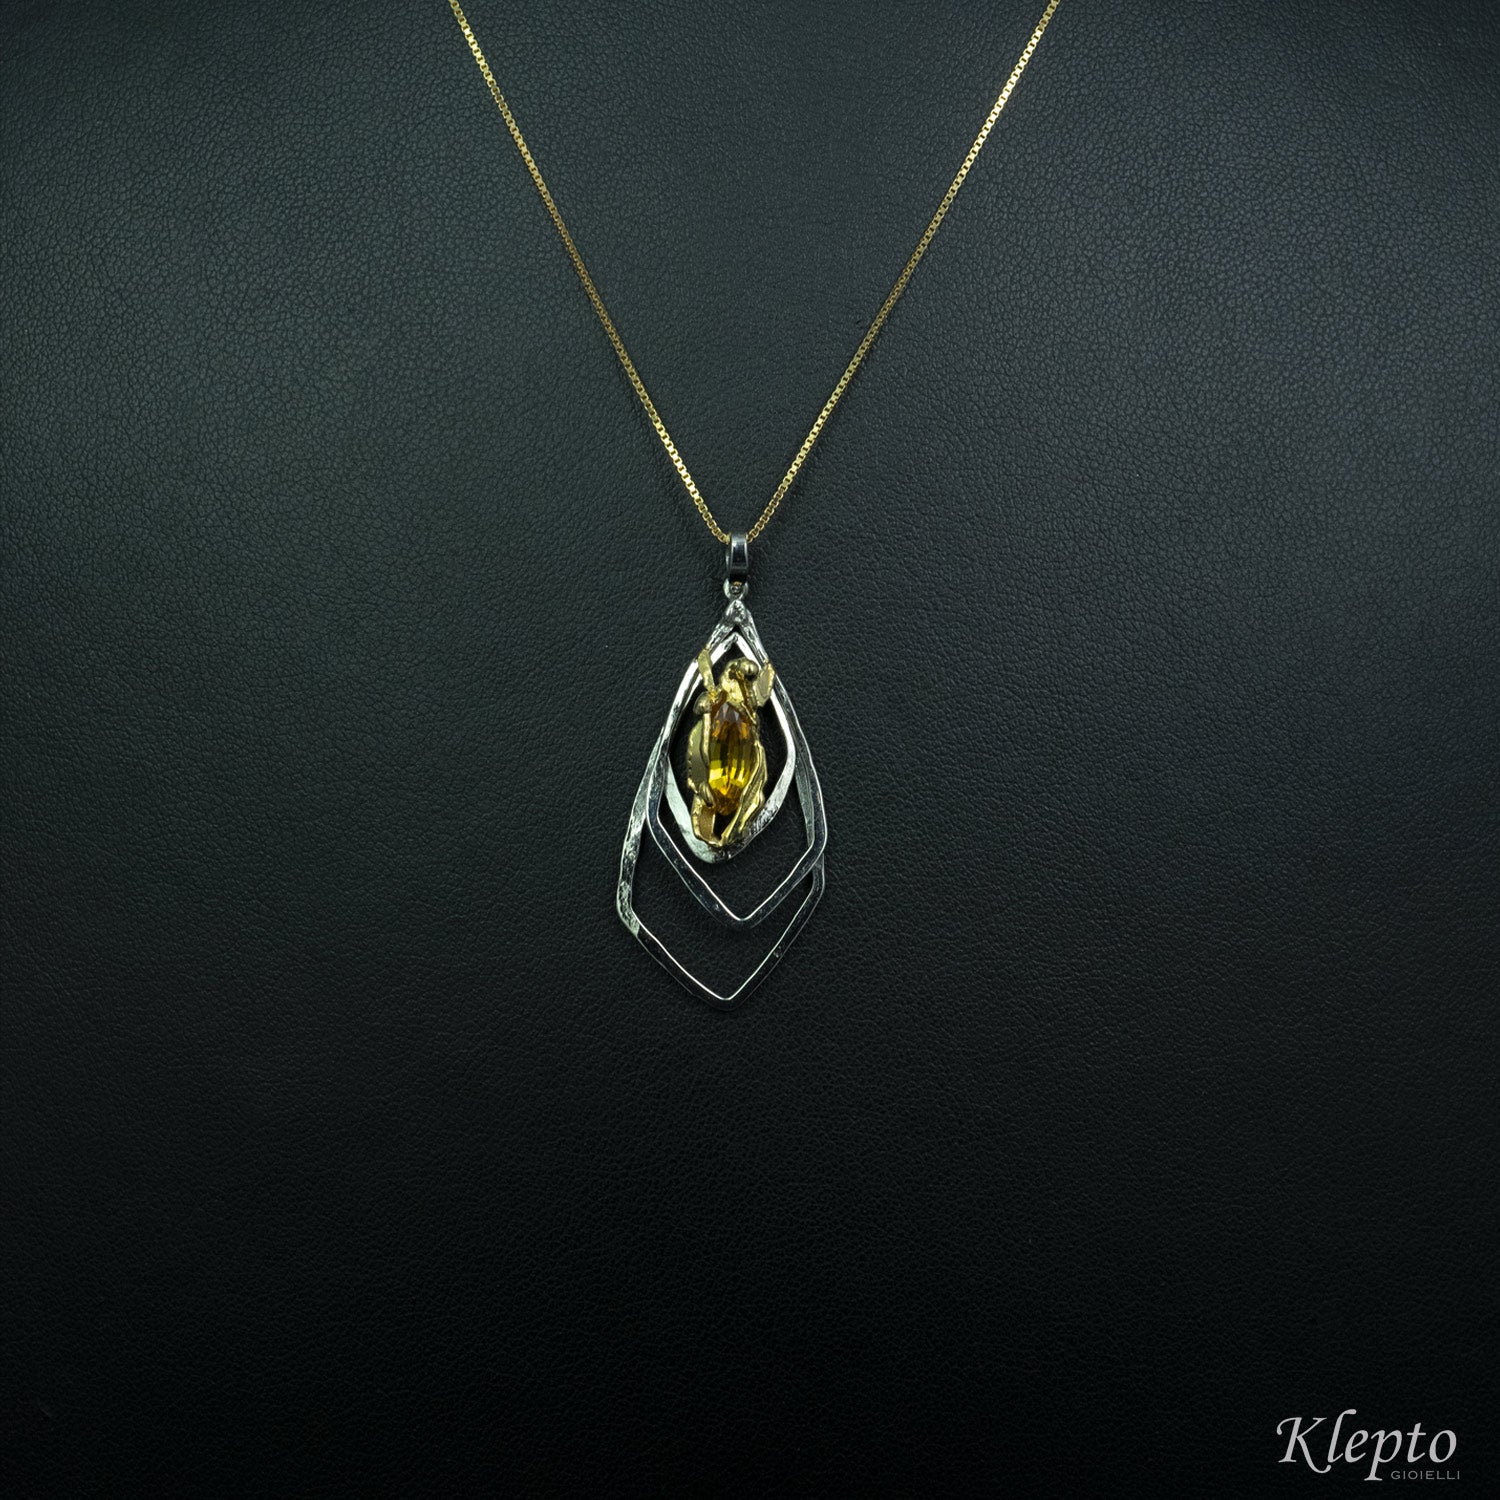 Pendant in white gold and yellow gold with natural Zircon